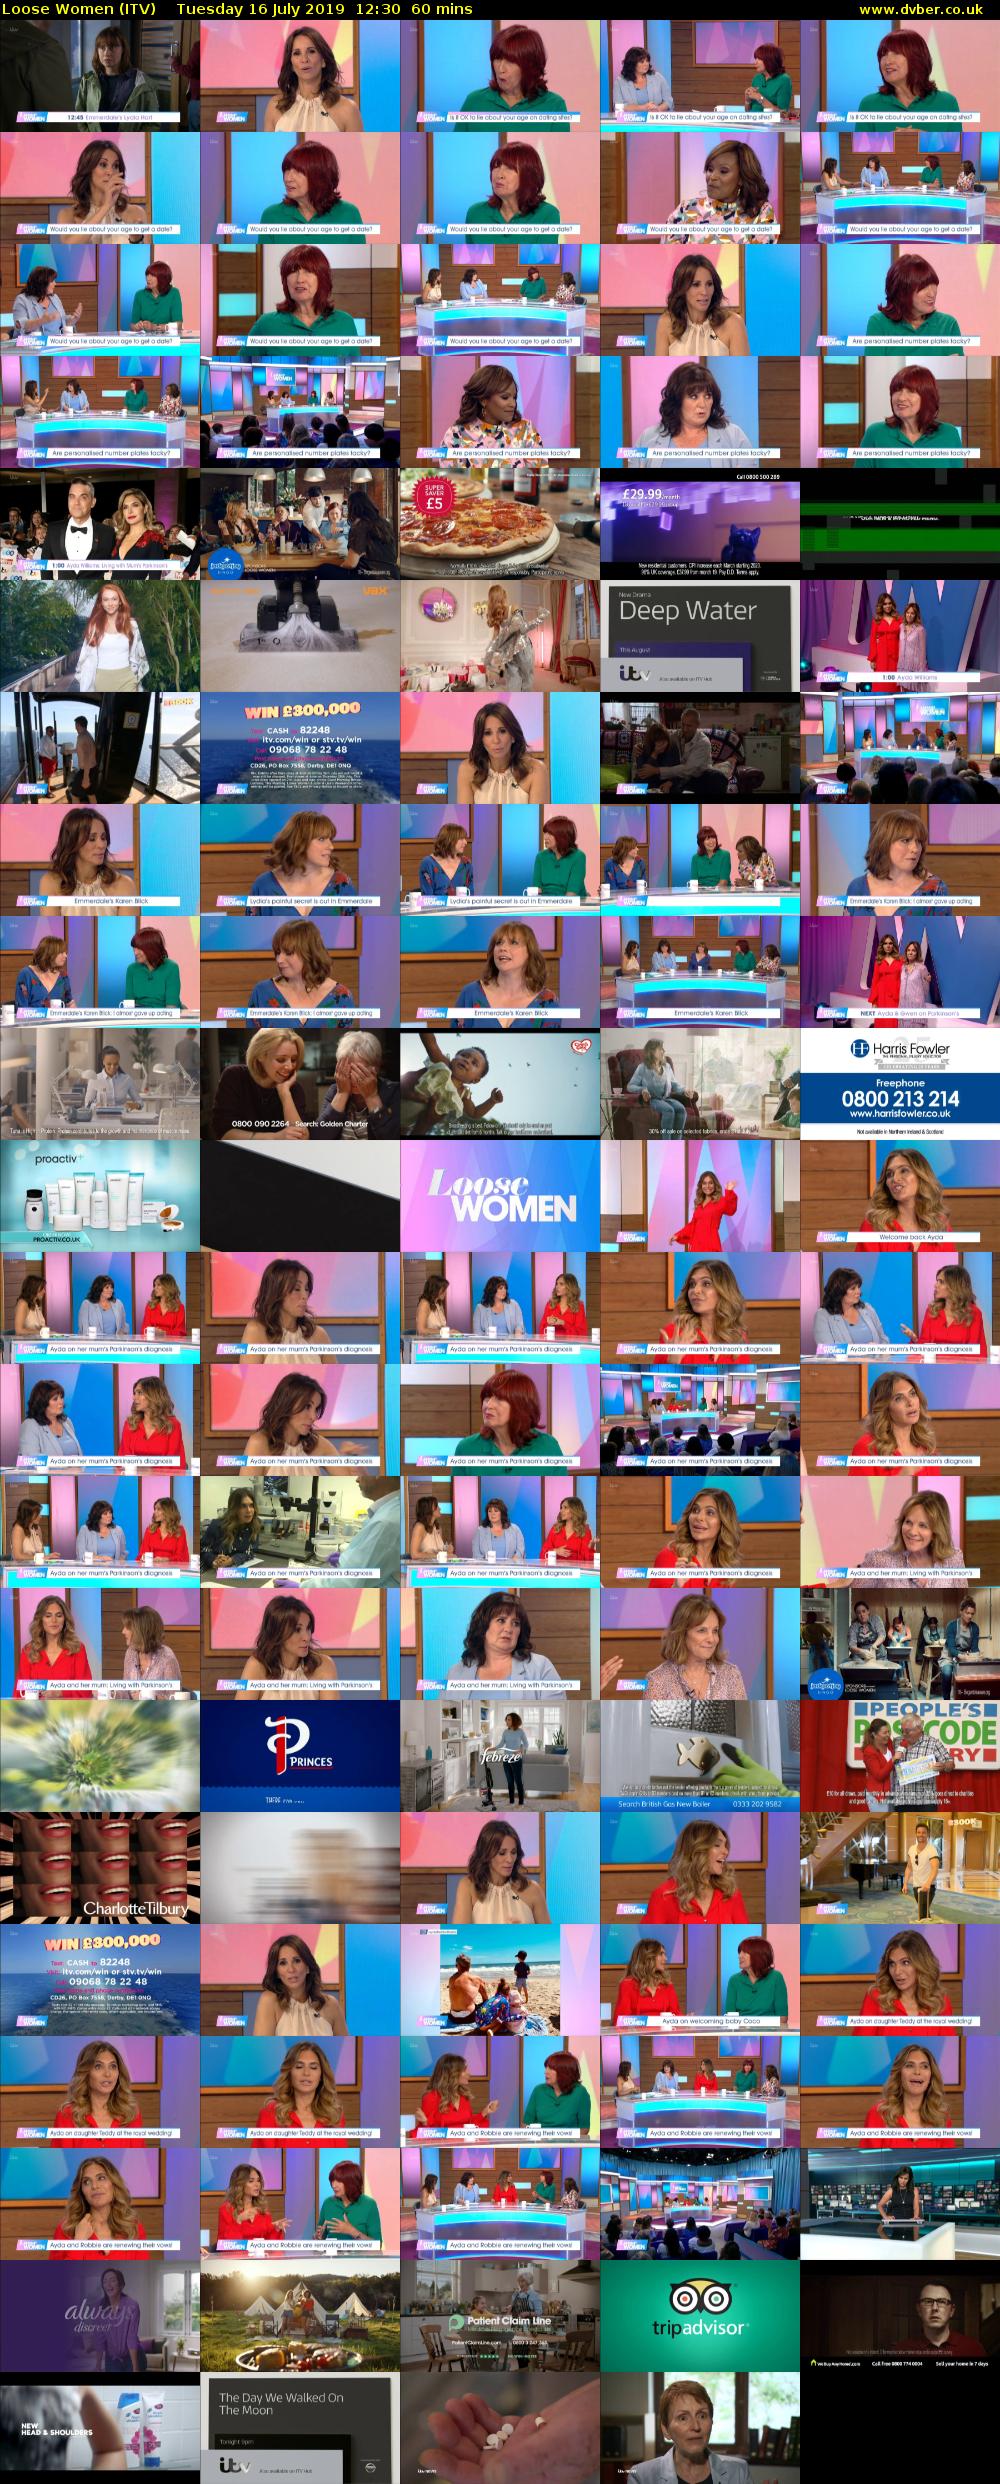 Loose Women (ITV) Tuesday 16 July 2019 12:30 - 13:30